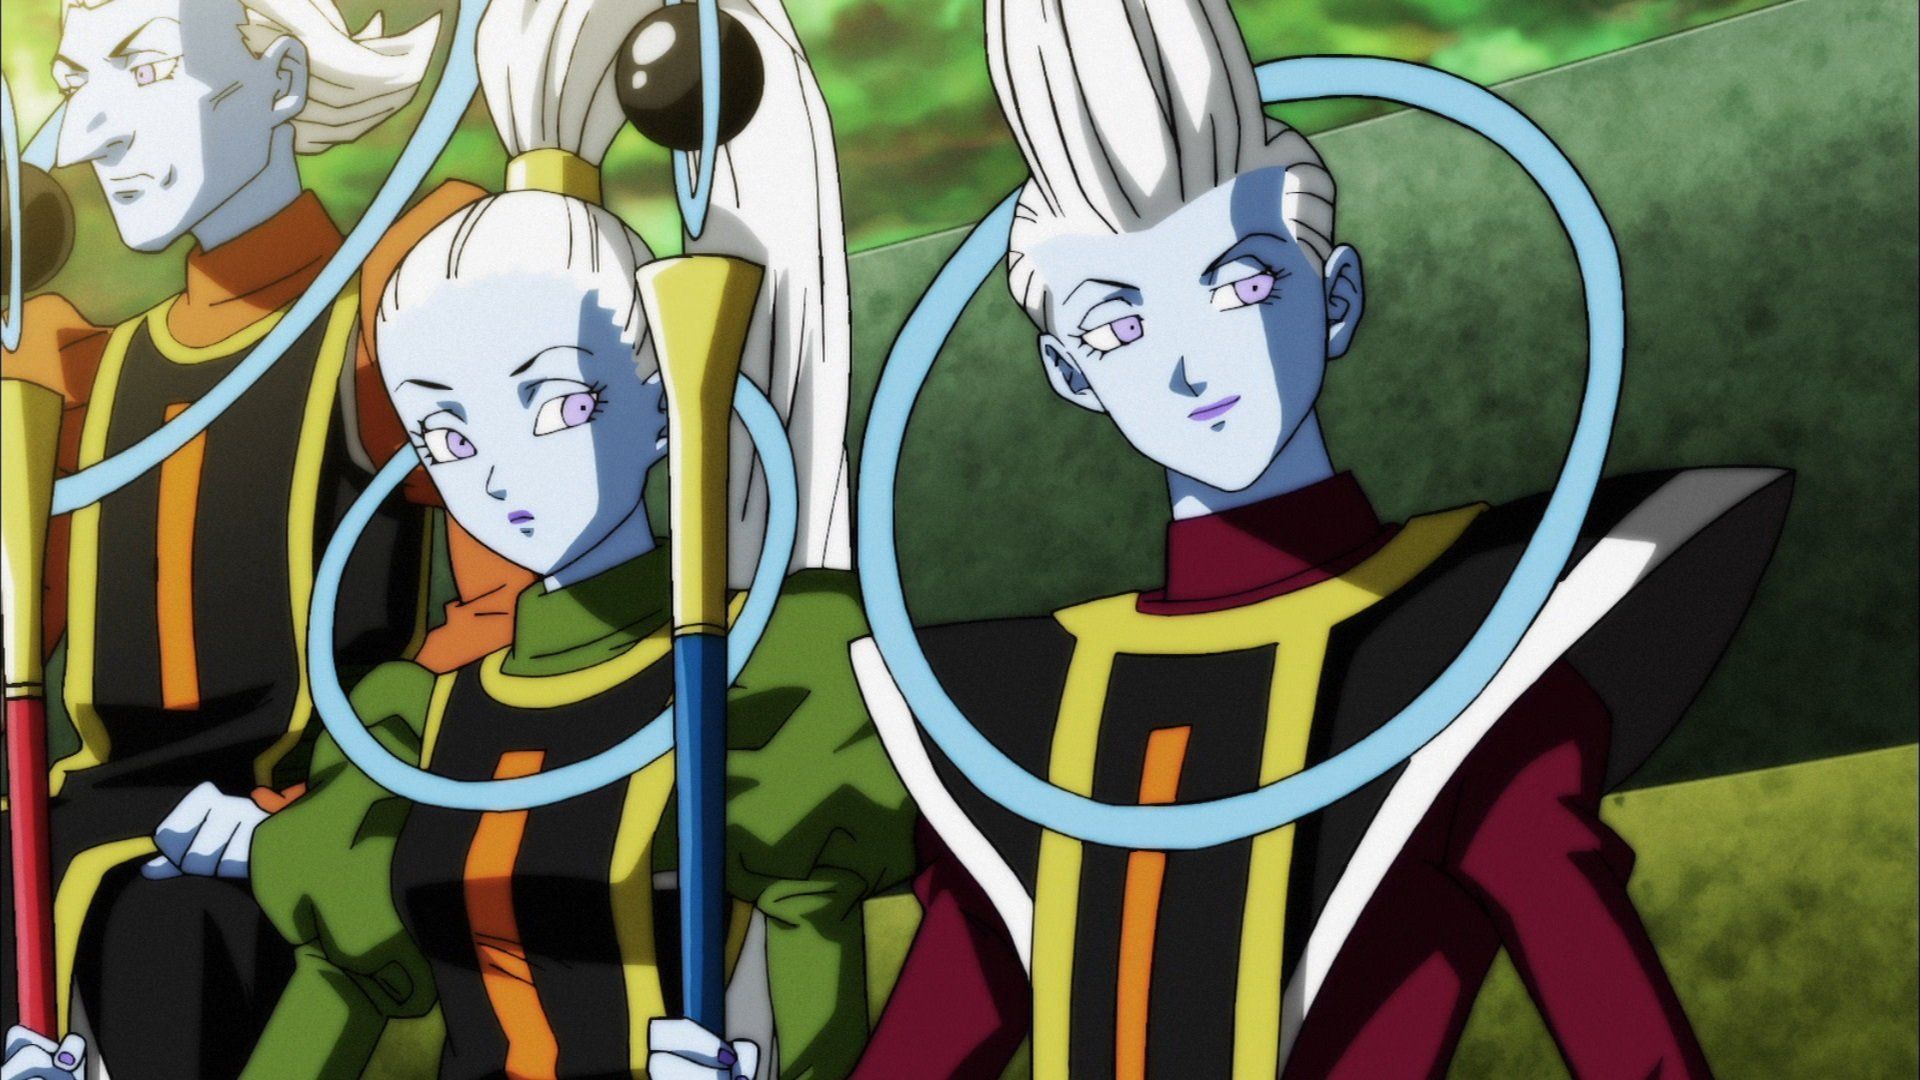 Whis, Vados, and Campari during the tournament of power (Image via Toei Animation)